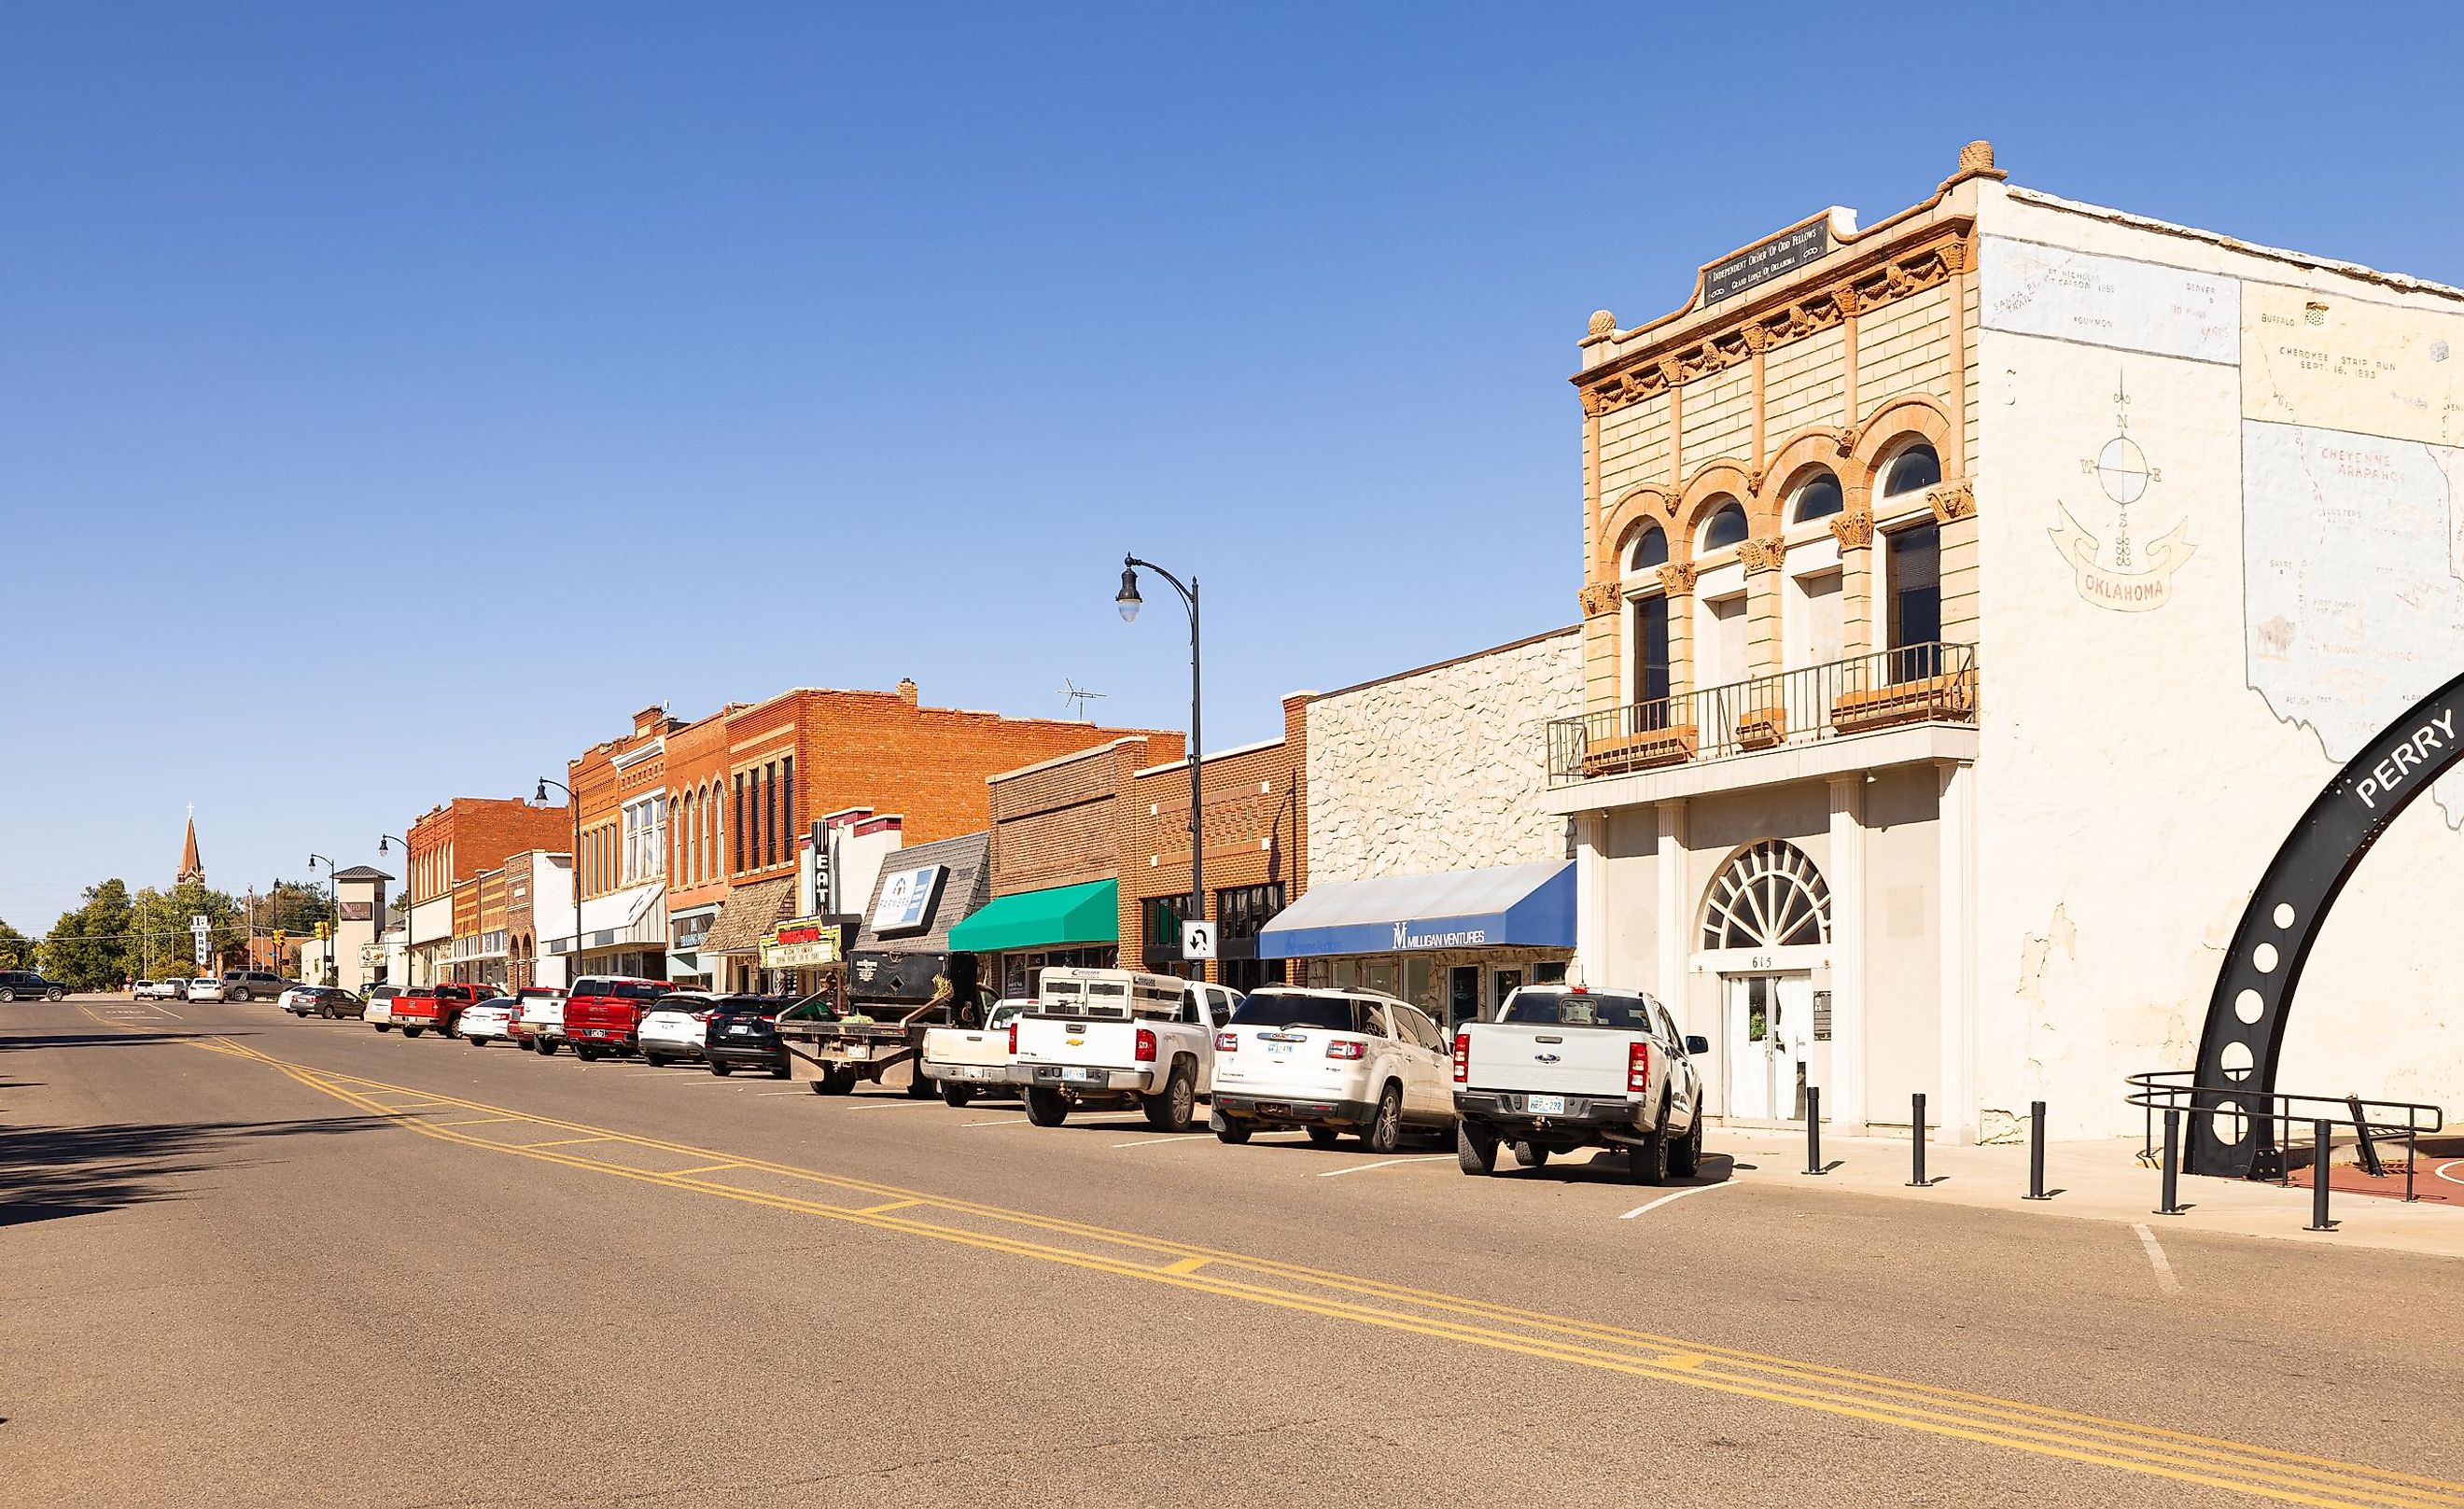 Perry, Oklahoma, USA - October 17, 2022: The old business district on Delaware Street